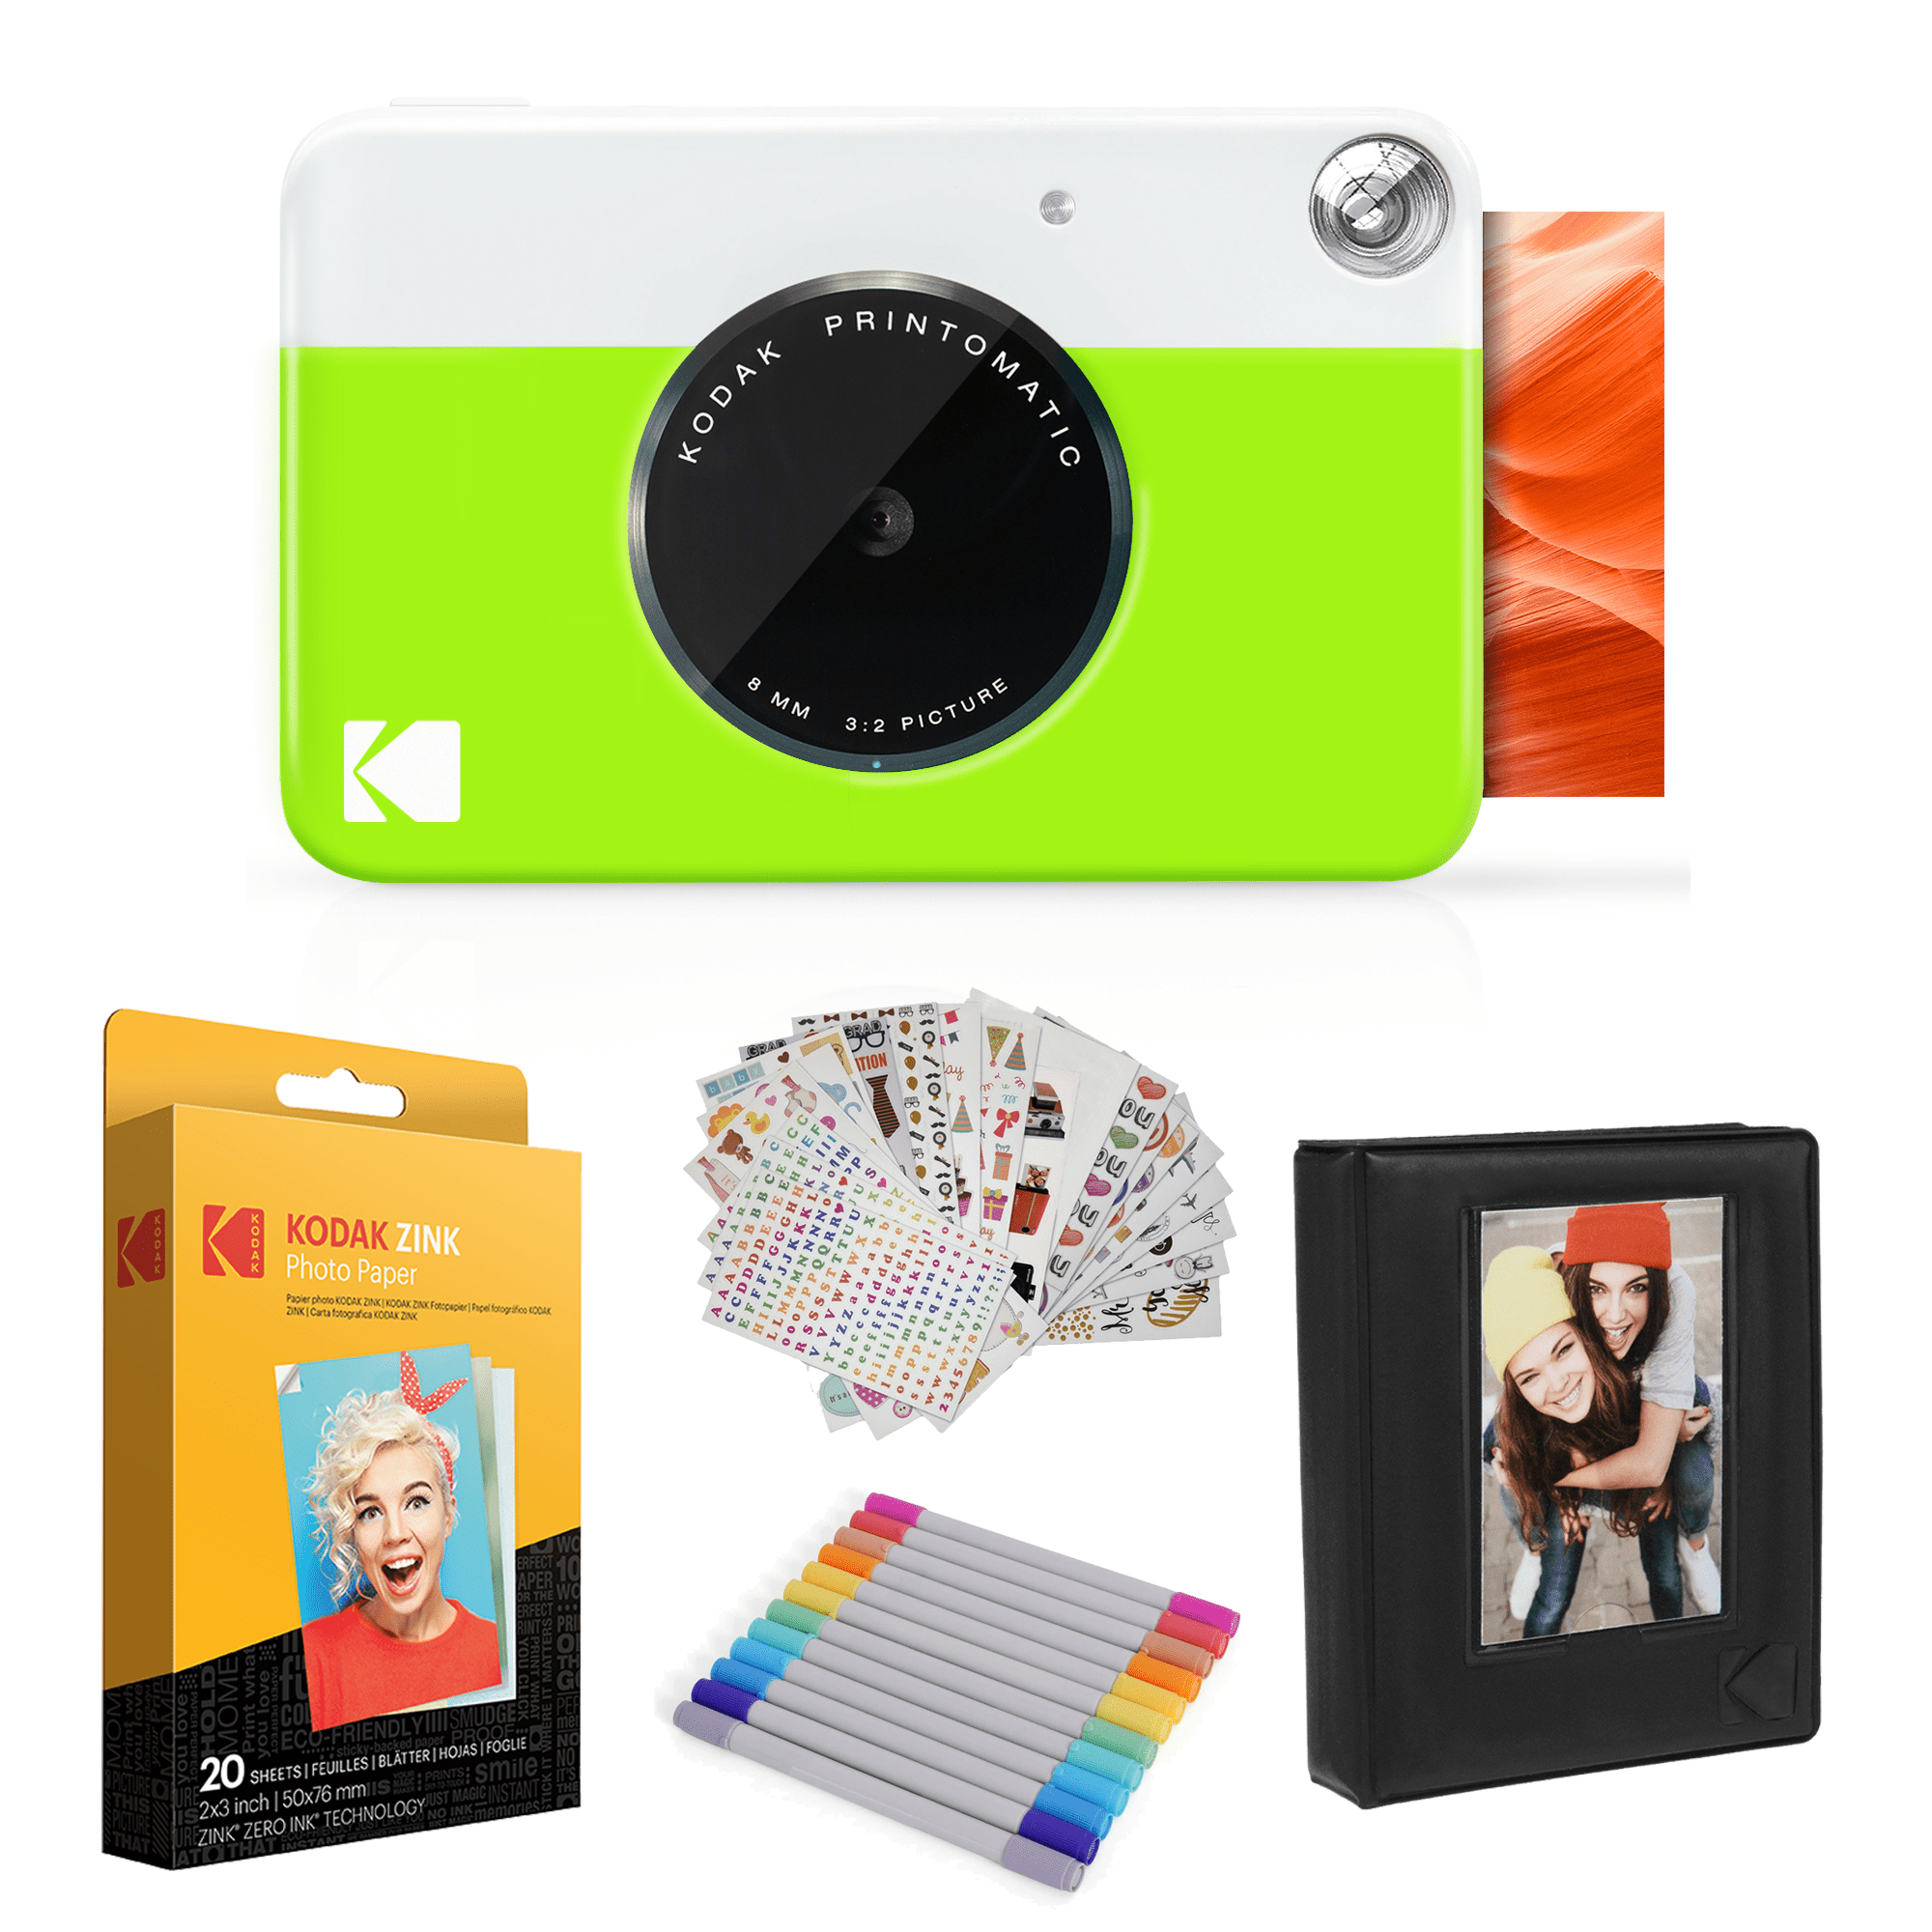  Kodak PRINTOMATIC Digital Instant Print Camera (Green), with  Extra Paper and Kids Instant Print Camera & Video Camcorder Bundle with  Frames, Filters for Hours of Fun - Pink : Electronics